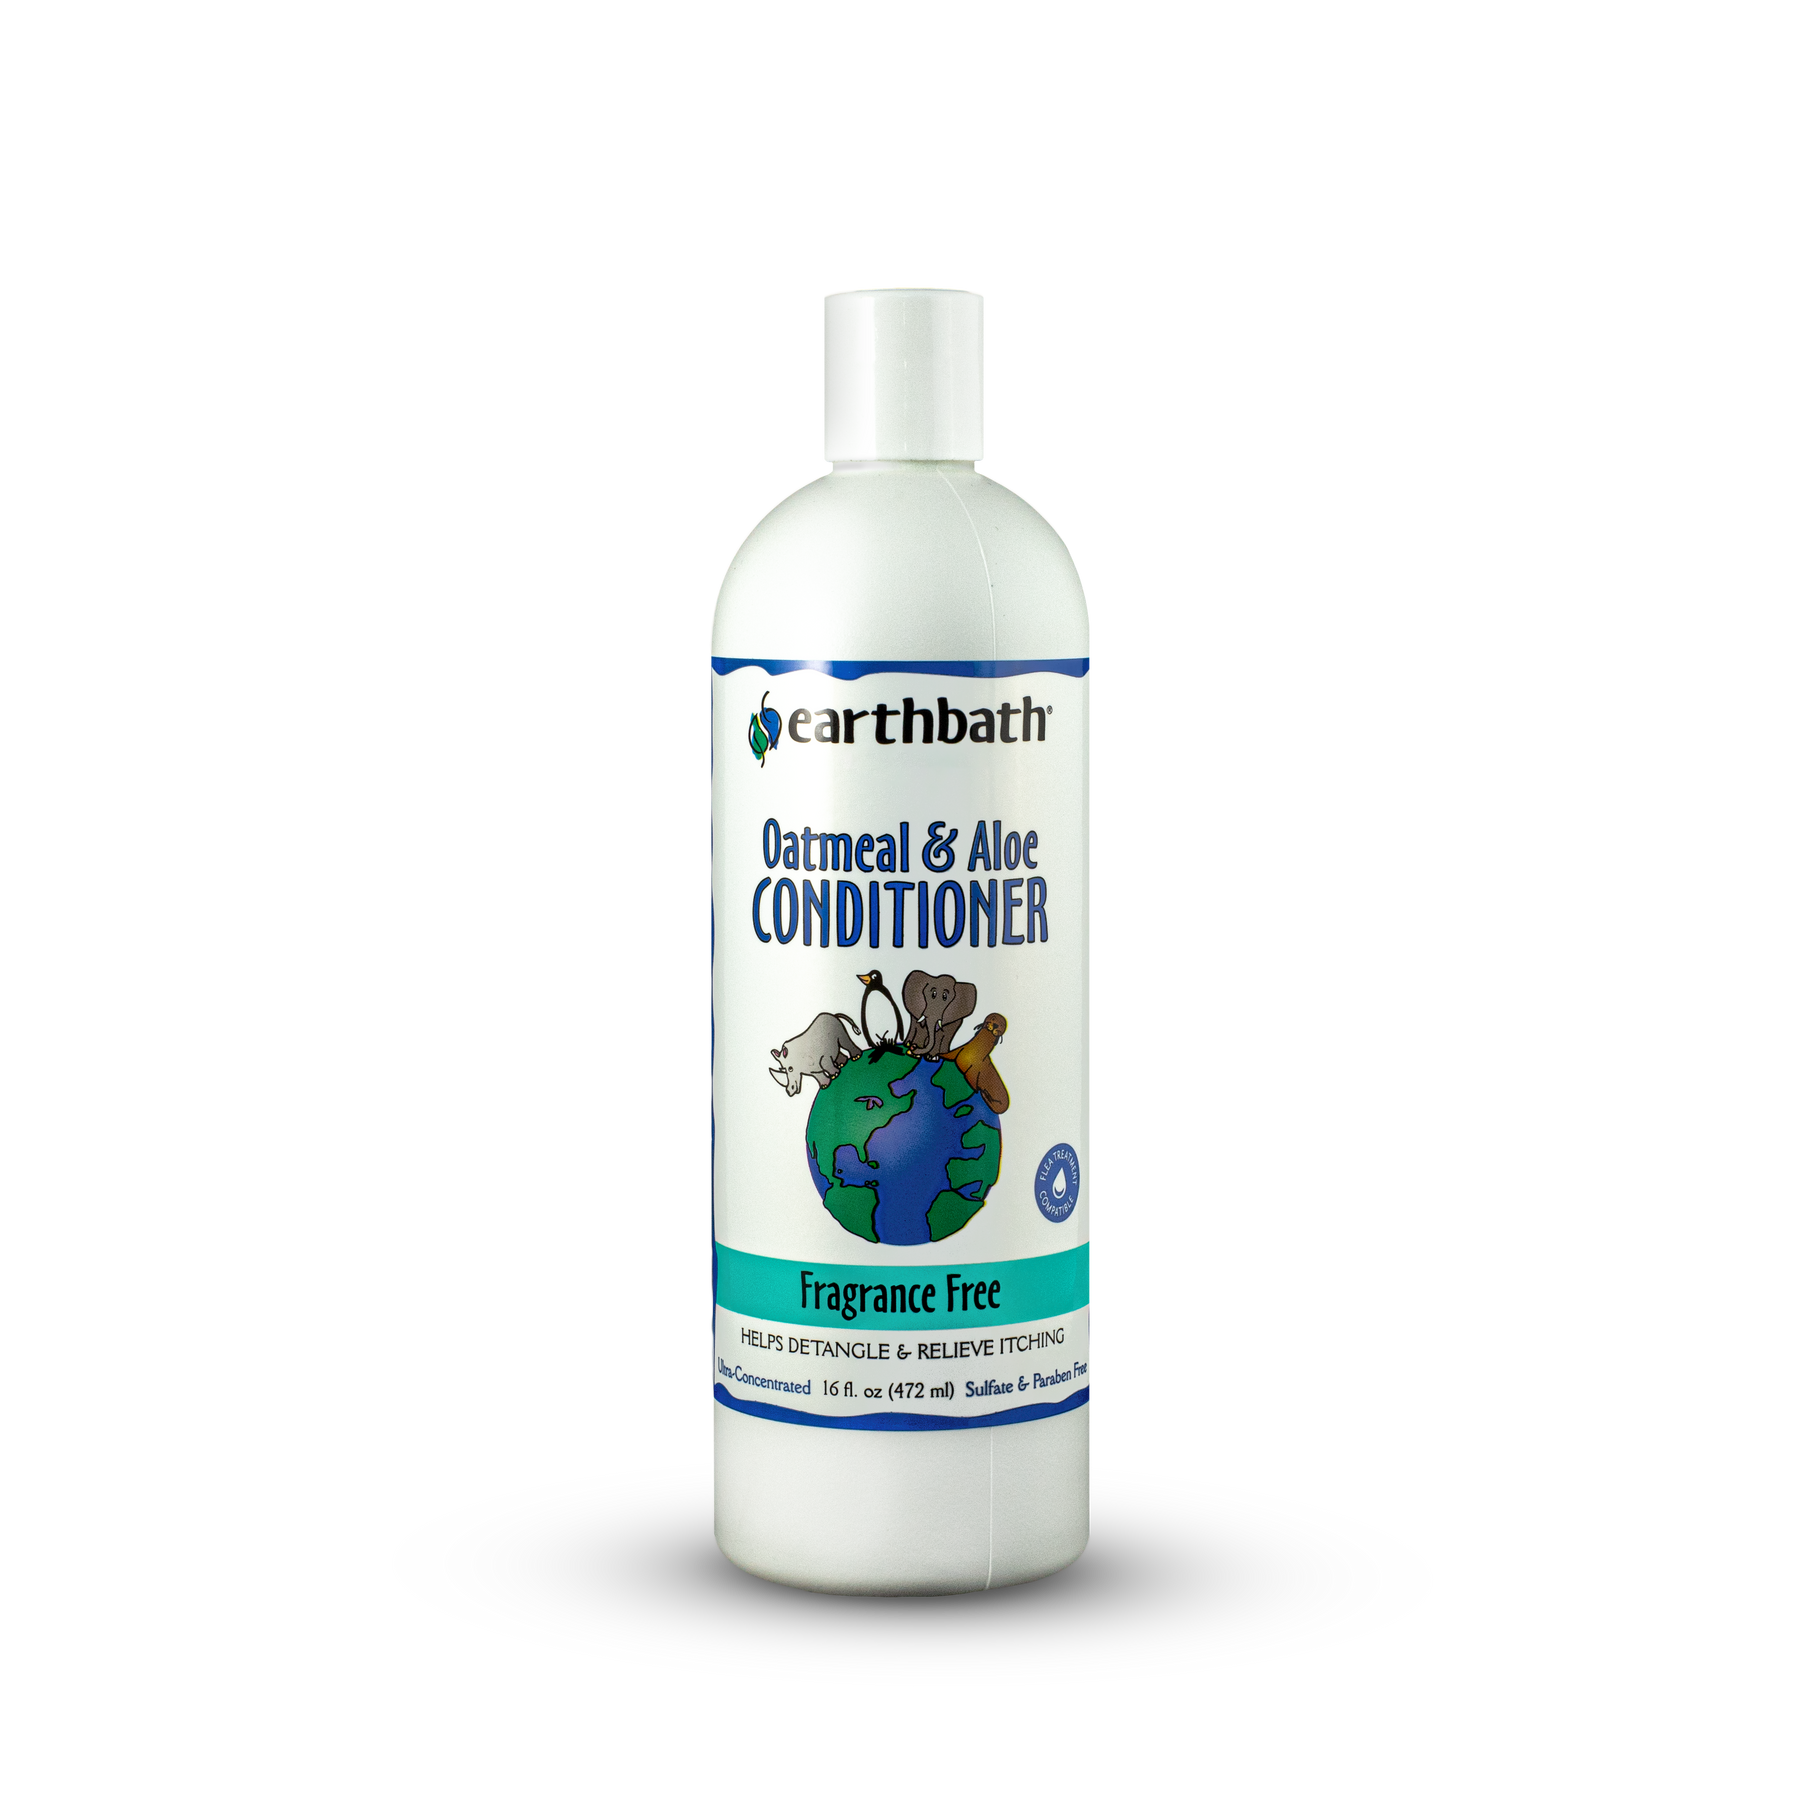 earthbath® Oatmeal & Aloe Conditioner, Fragrance Free, Helps Relieve Itchy Dry Skin, Made in USA, 16 oz